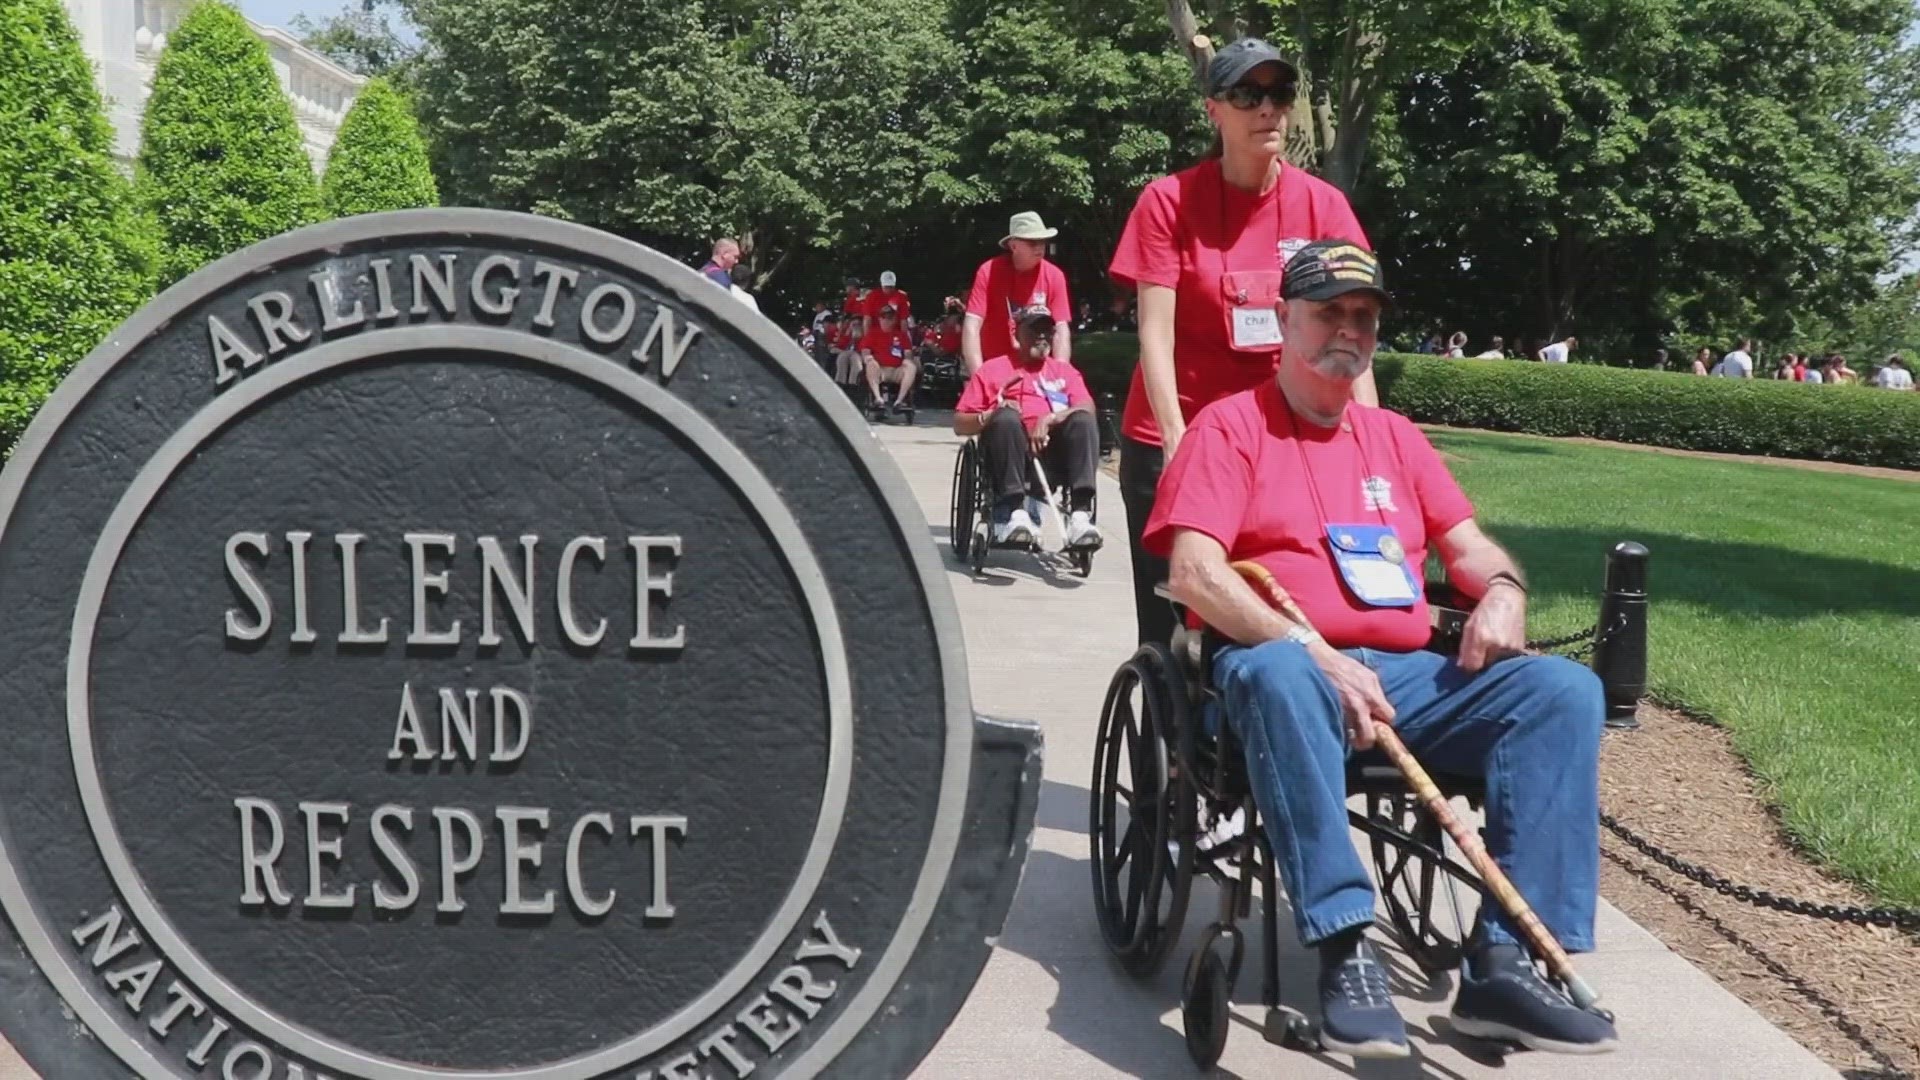 22 veterans will fly from Jacksonville to Washington D.C. and be there for the whole day Saturday as they will be honored & celebrated with a handful of activities.